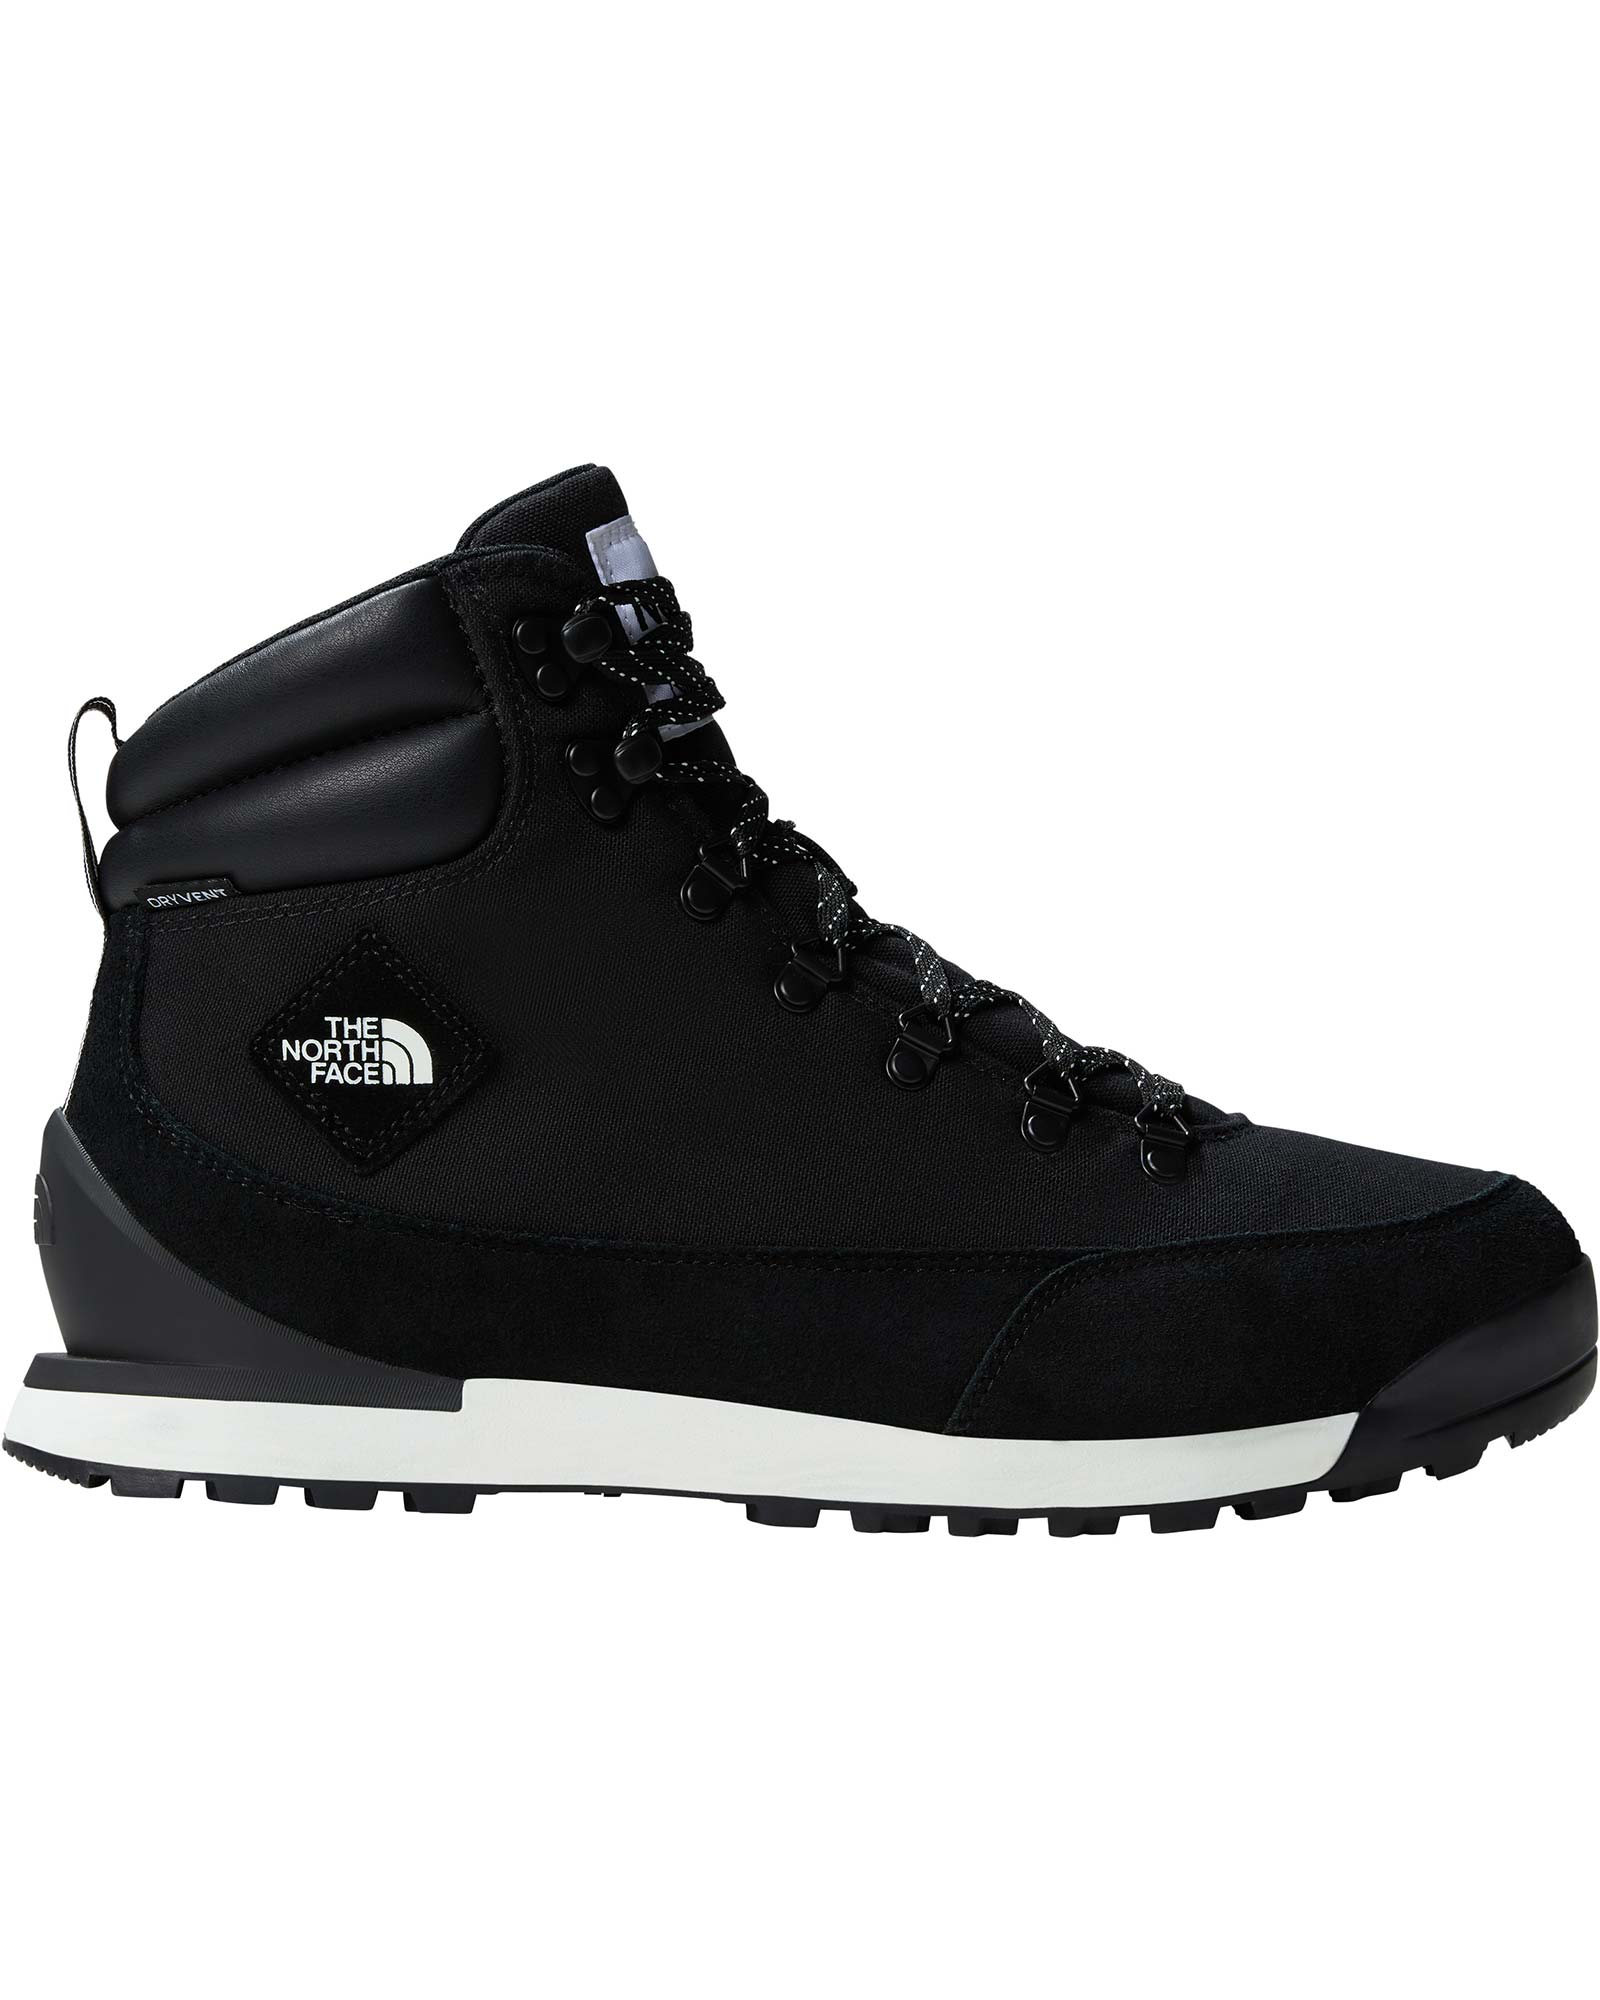 The North Face Back to Berkeley IV Textile Waterproof Men’s Boots - TNF Black/TNF White UK 9